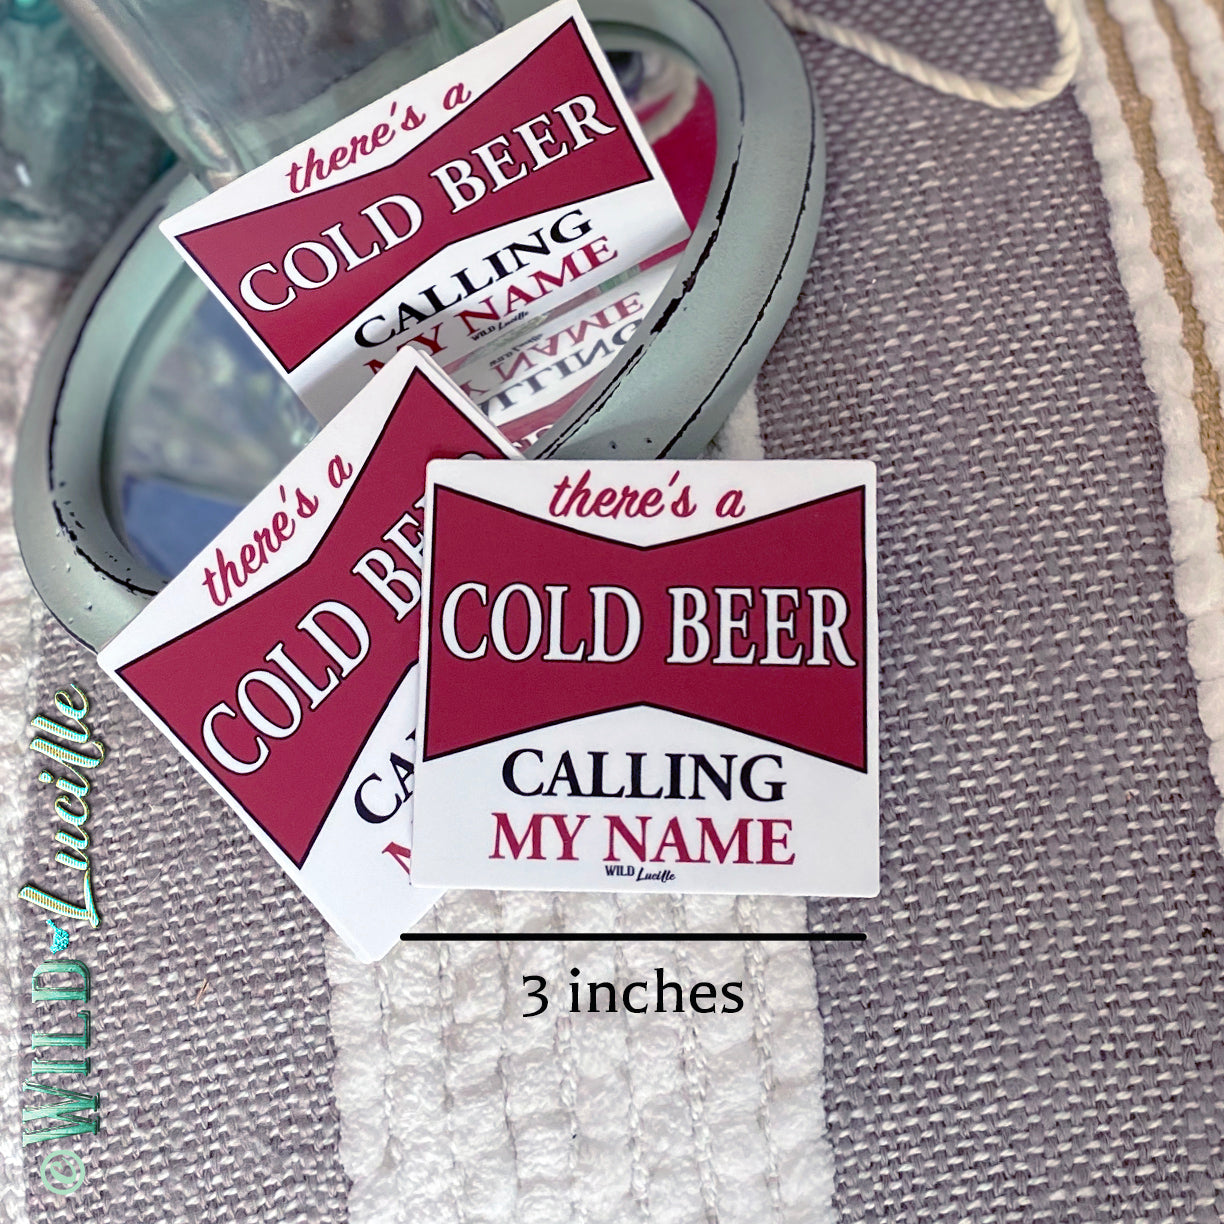 There's a Cold Beer Calling My Name - Vinyl Sticker Decals